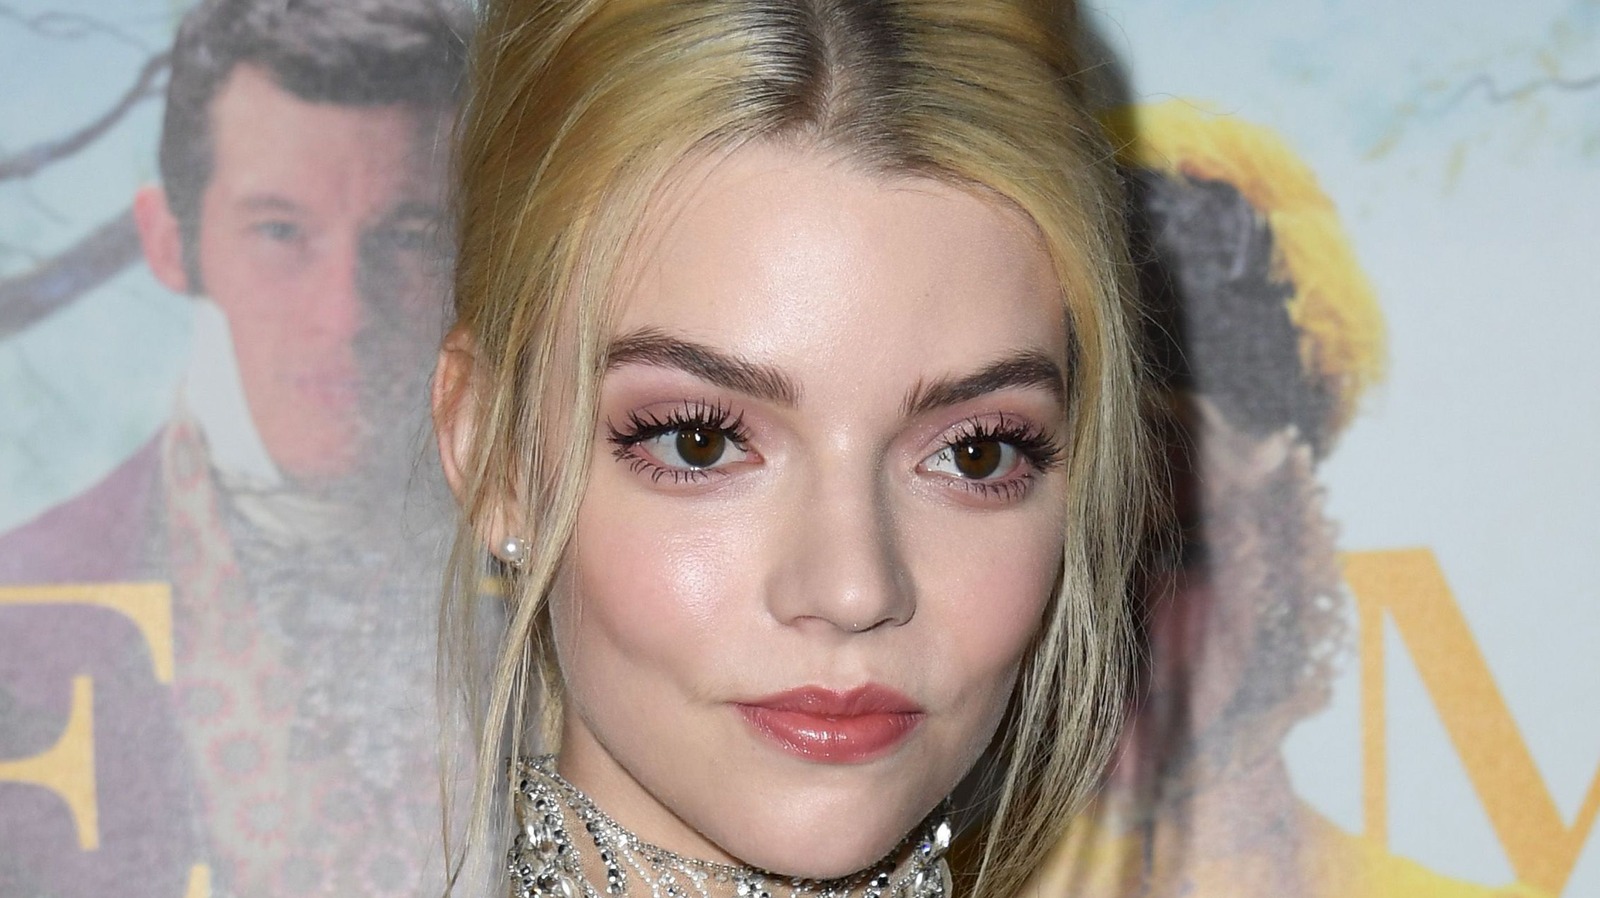 painful lever Second grade Why Anya Taylor-Joy's Upcoming Film Already Has Twitter In A Frenzy